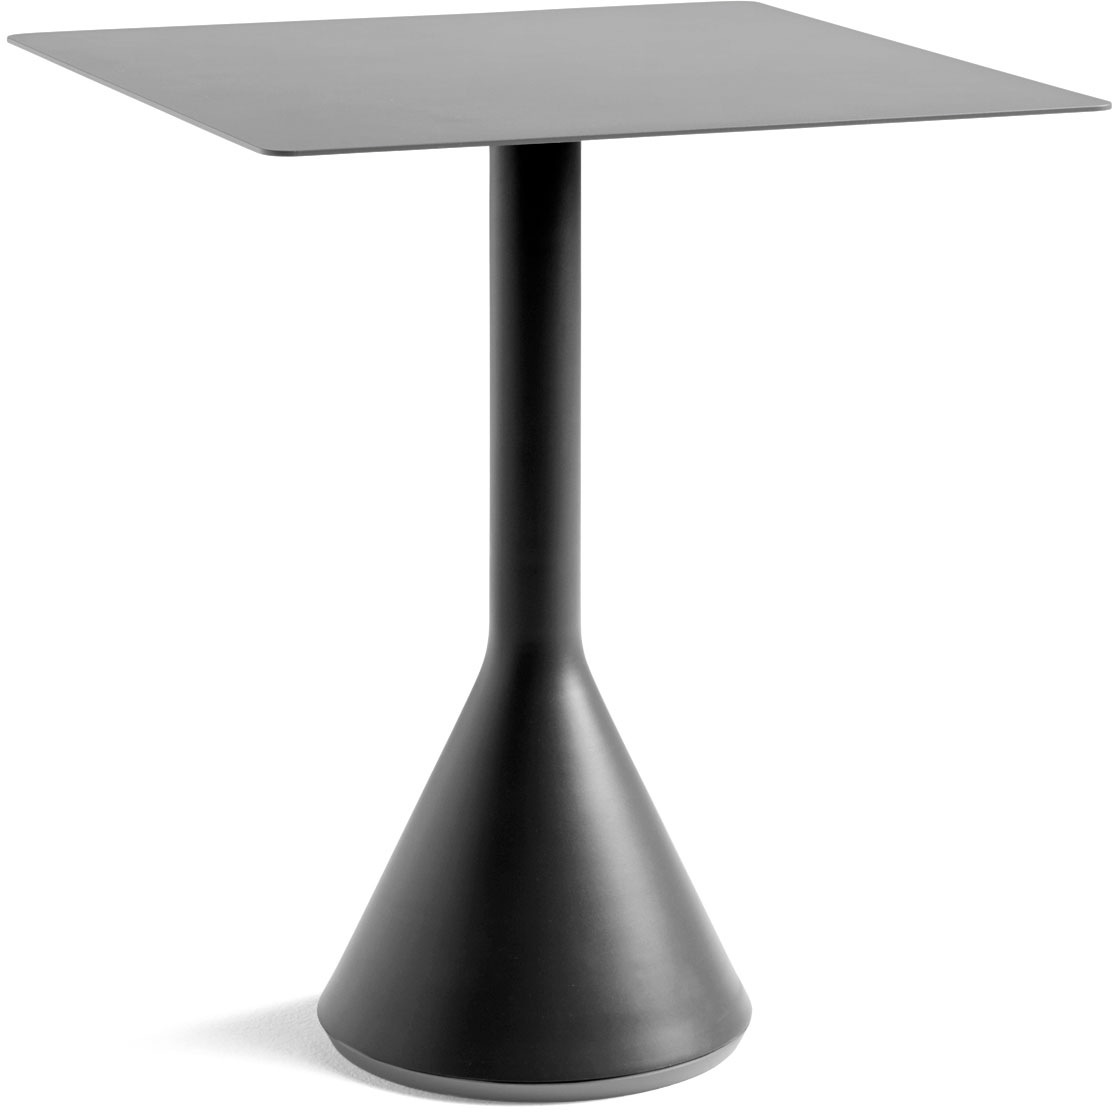 Palissade Cone Table 65x65 cm, Anthracite